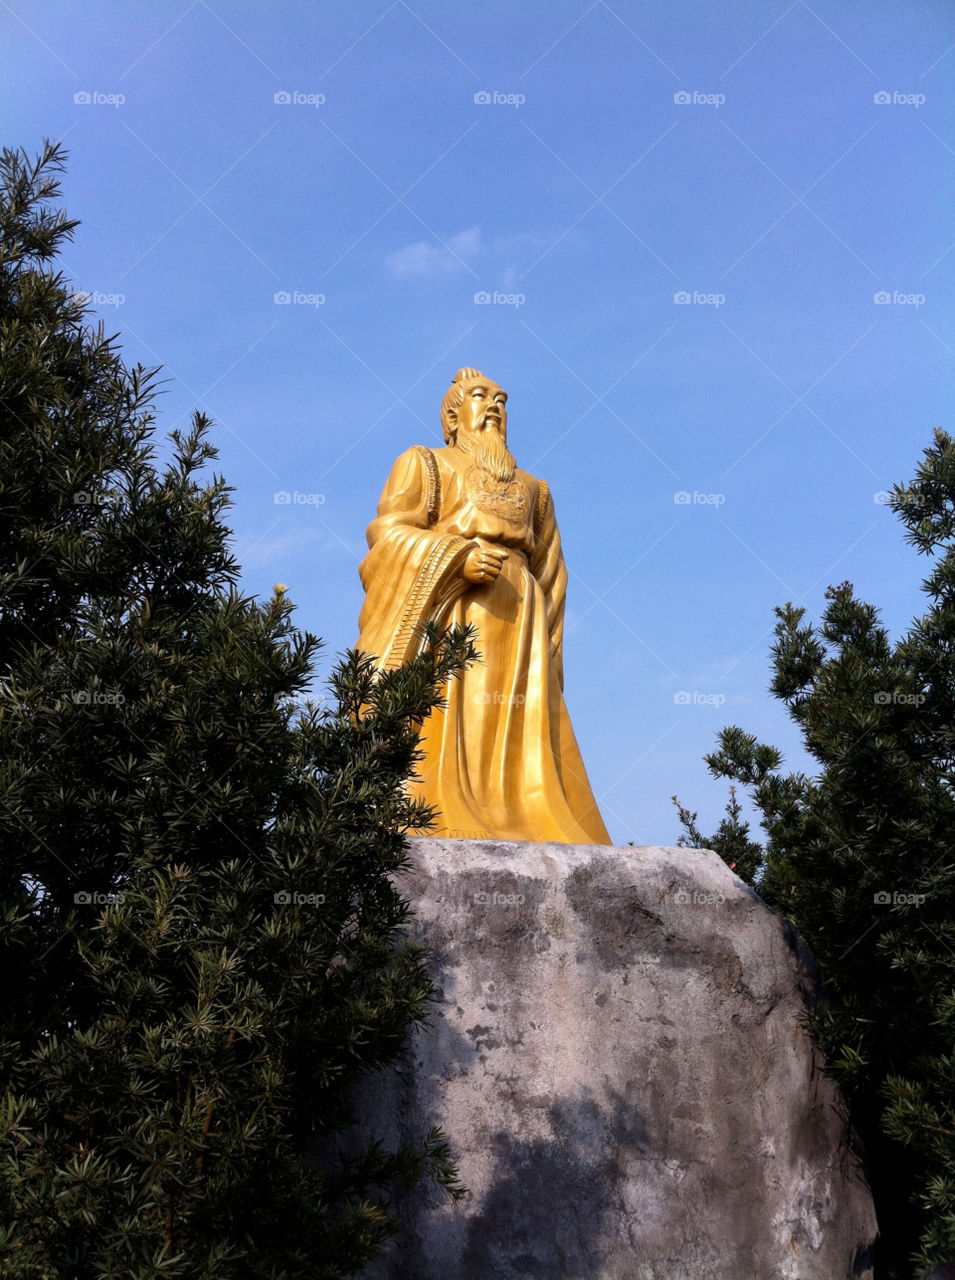 A gold statue at the top of the mountain.